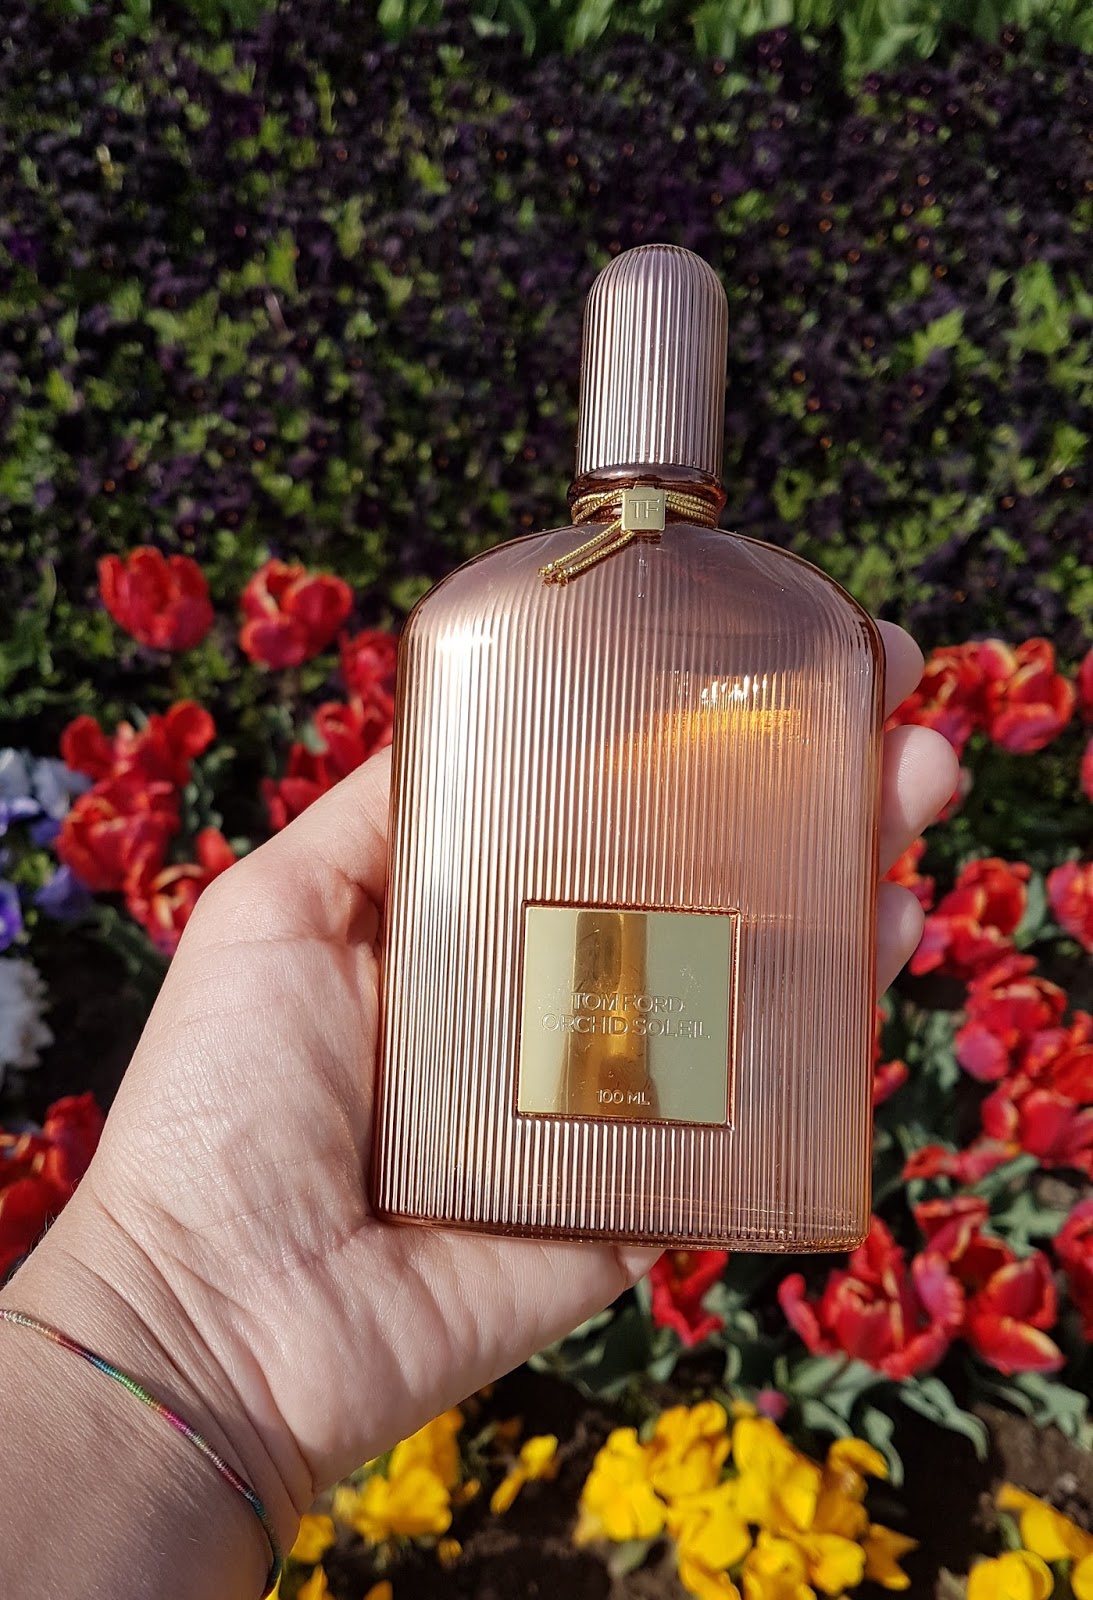 Orchid Soleil by Tom Ford